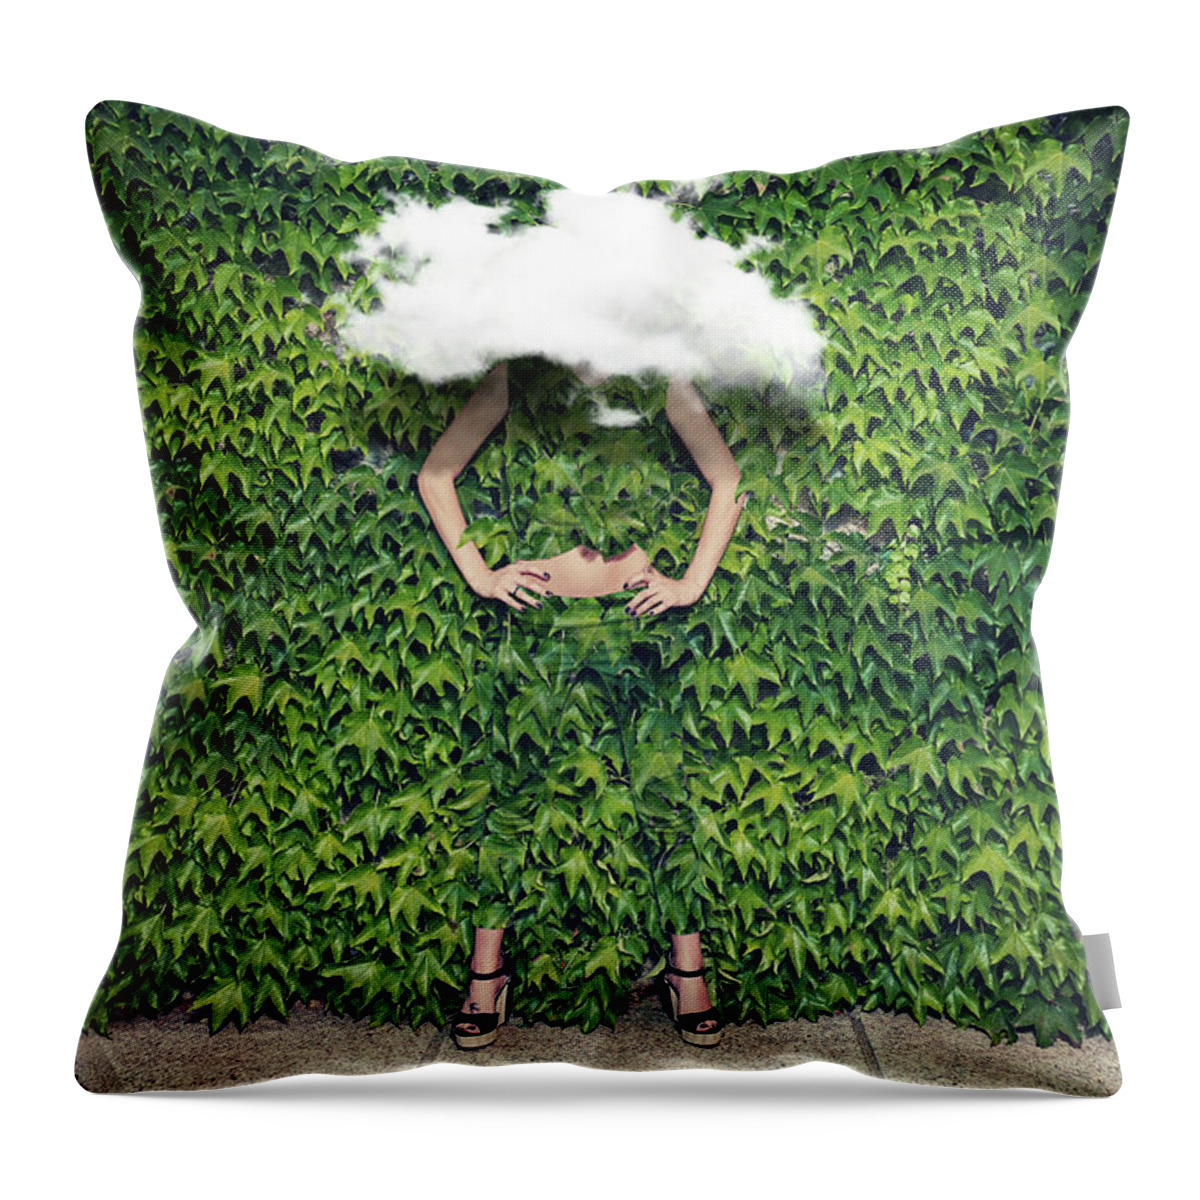 Tempio Pausania Throw Pillow featuring the photograph Image Of Young Woman On Ivy Plants And by Francesco Carta Fotografo